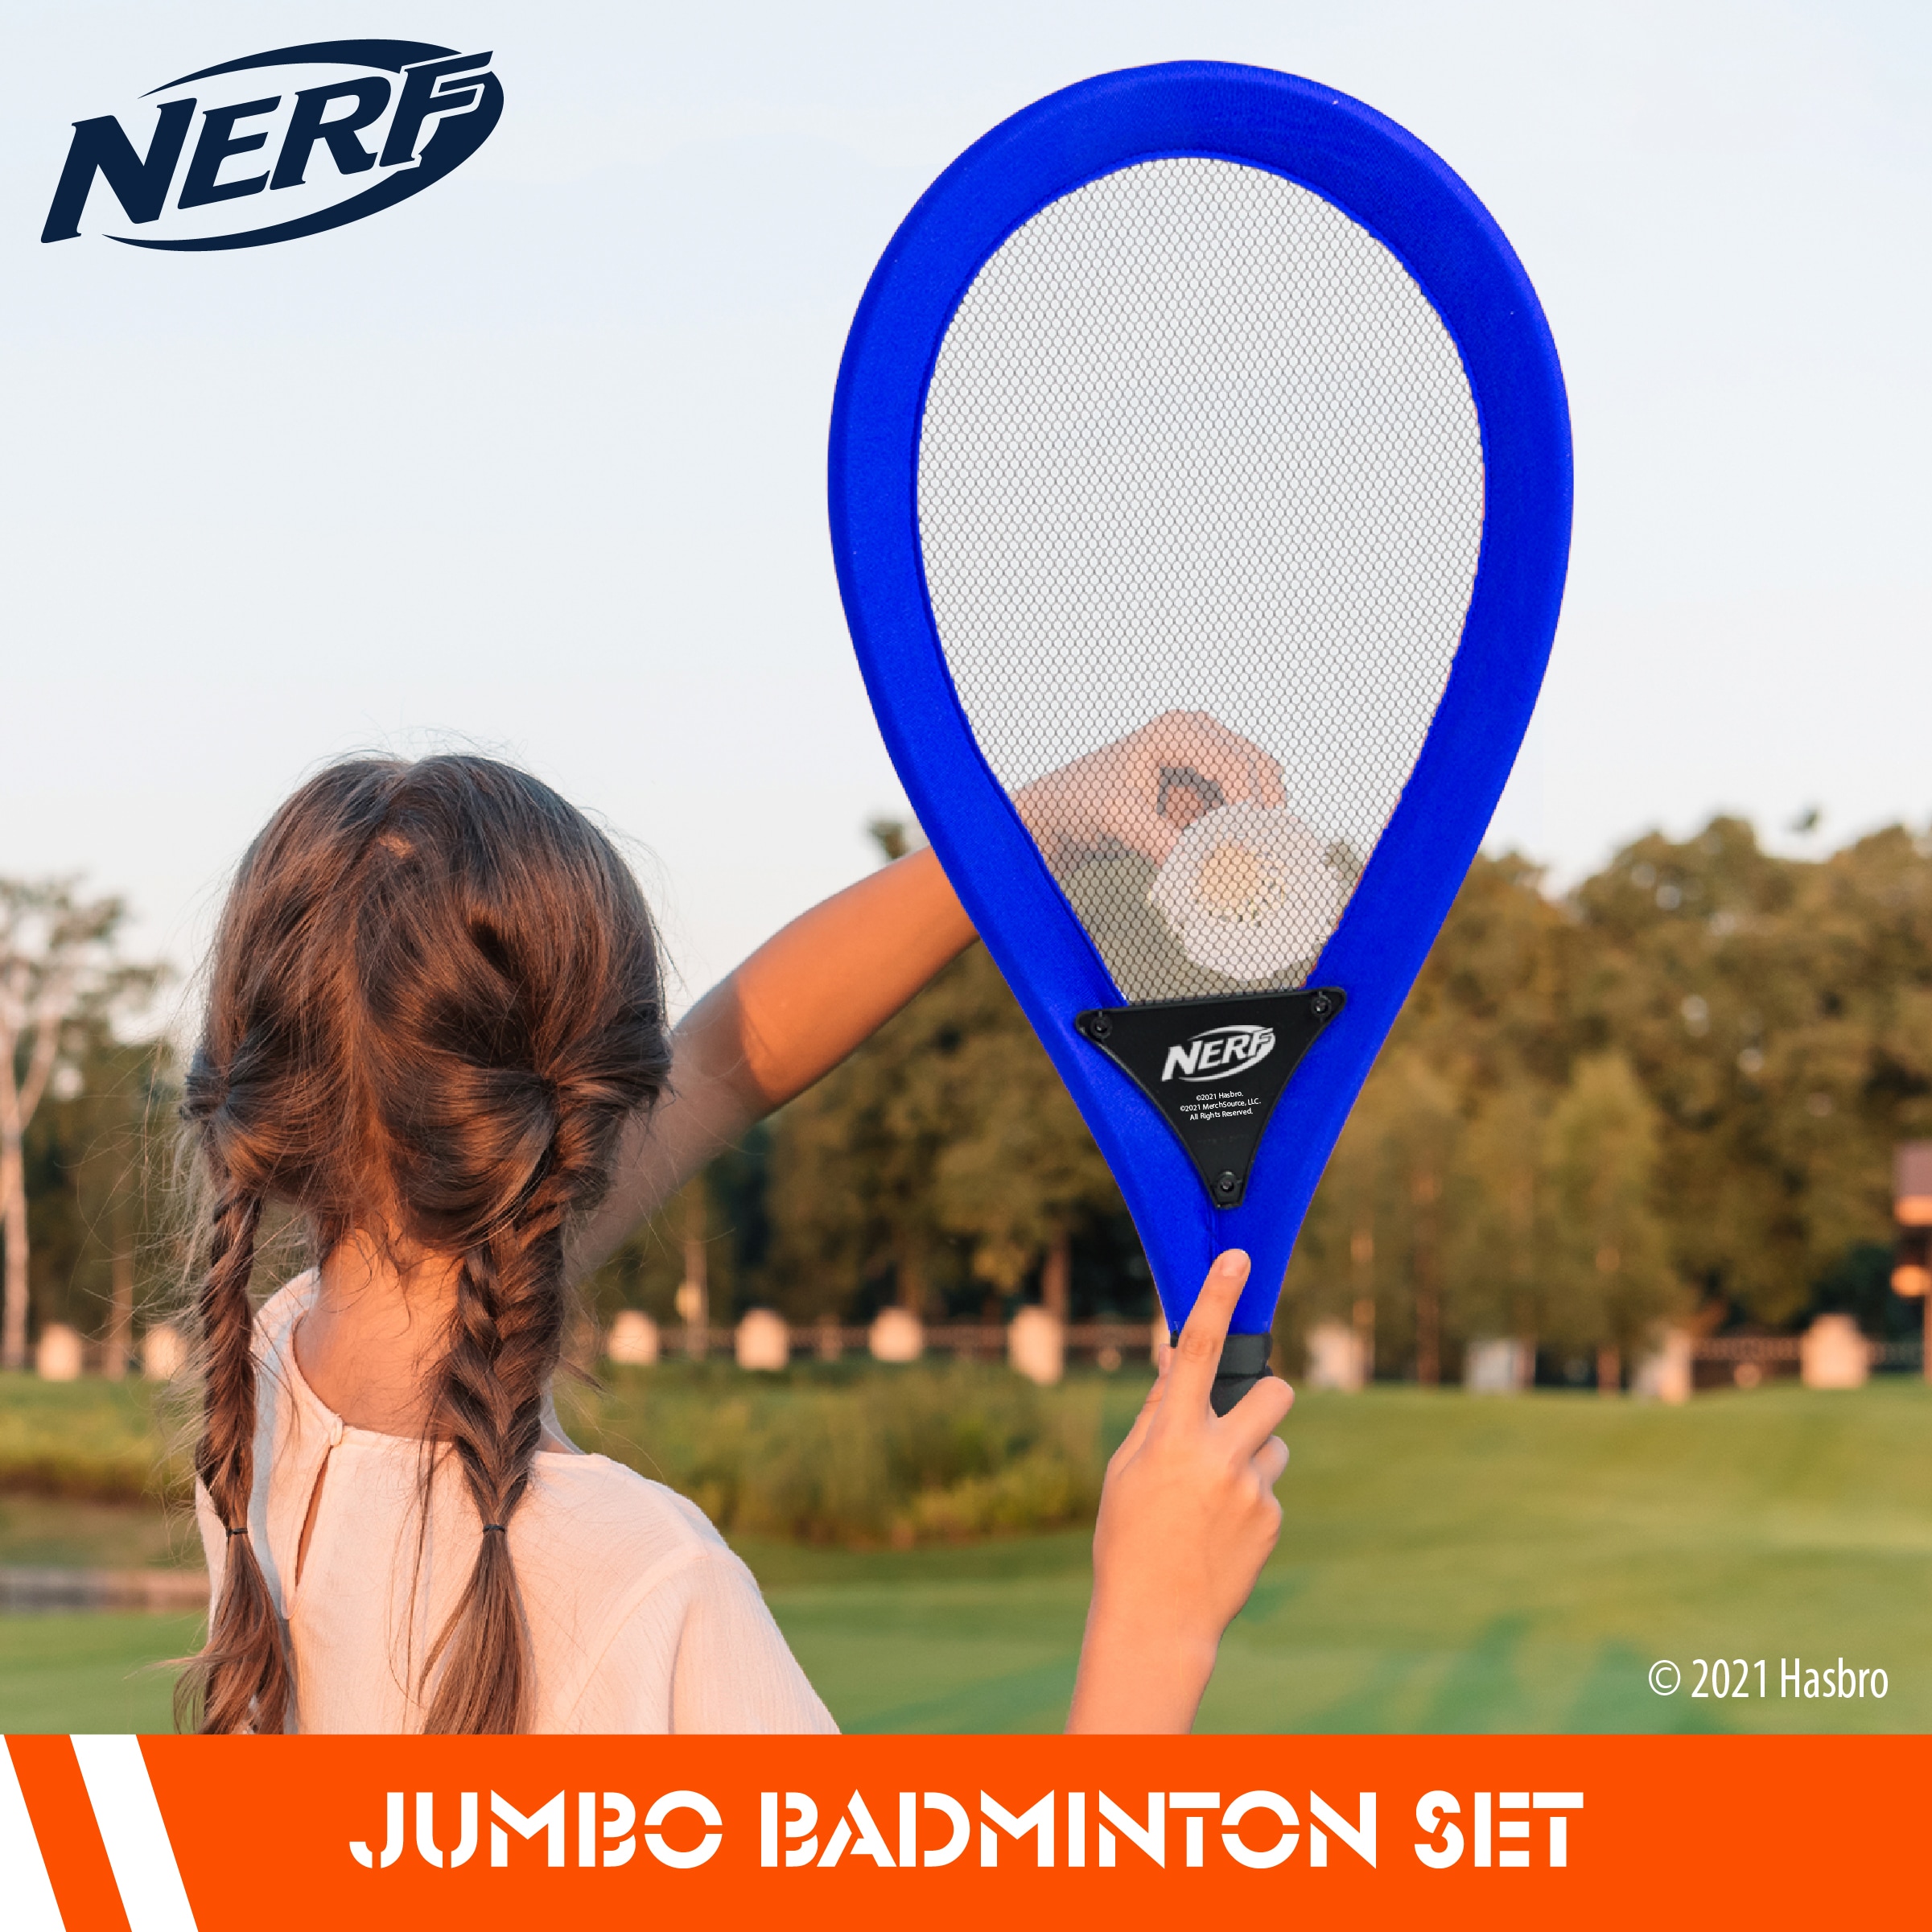 Nerf Game Mini Trampoline Paddle Set - Outdoor Party Game - Twin